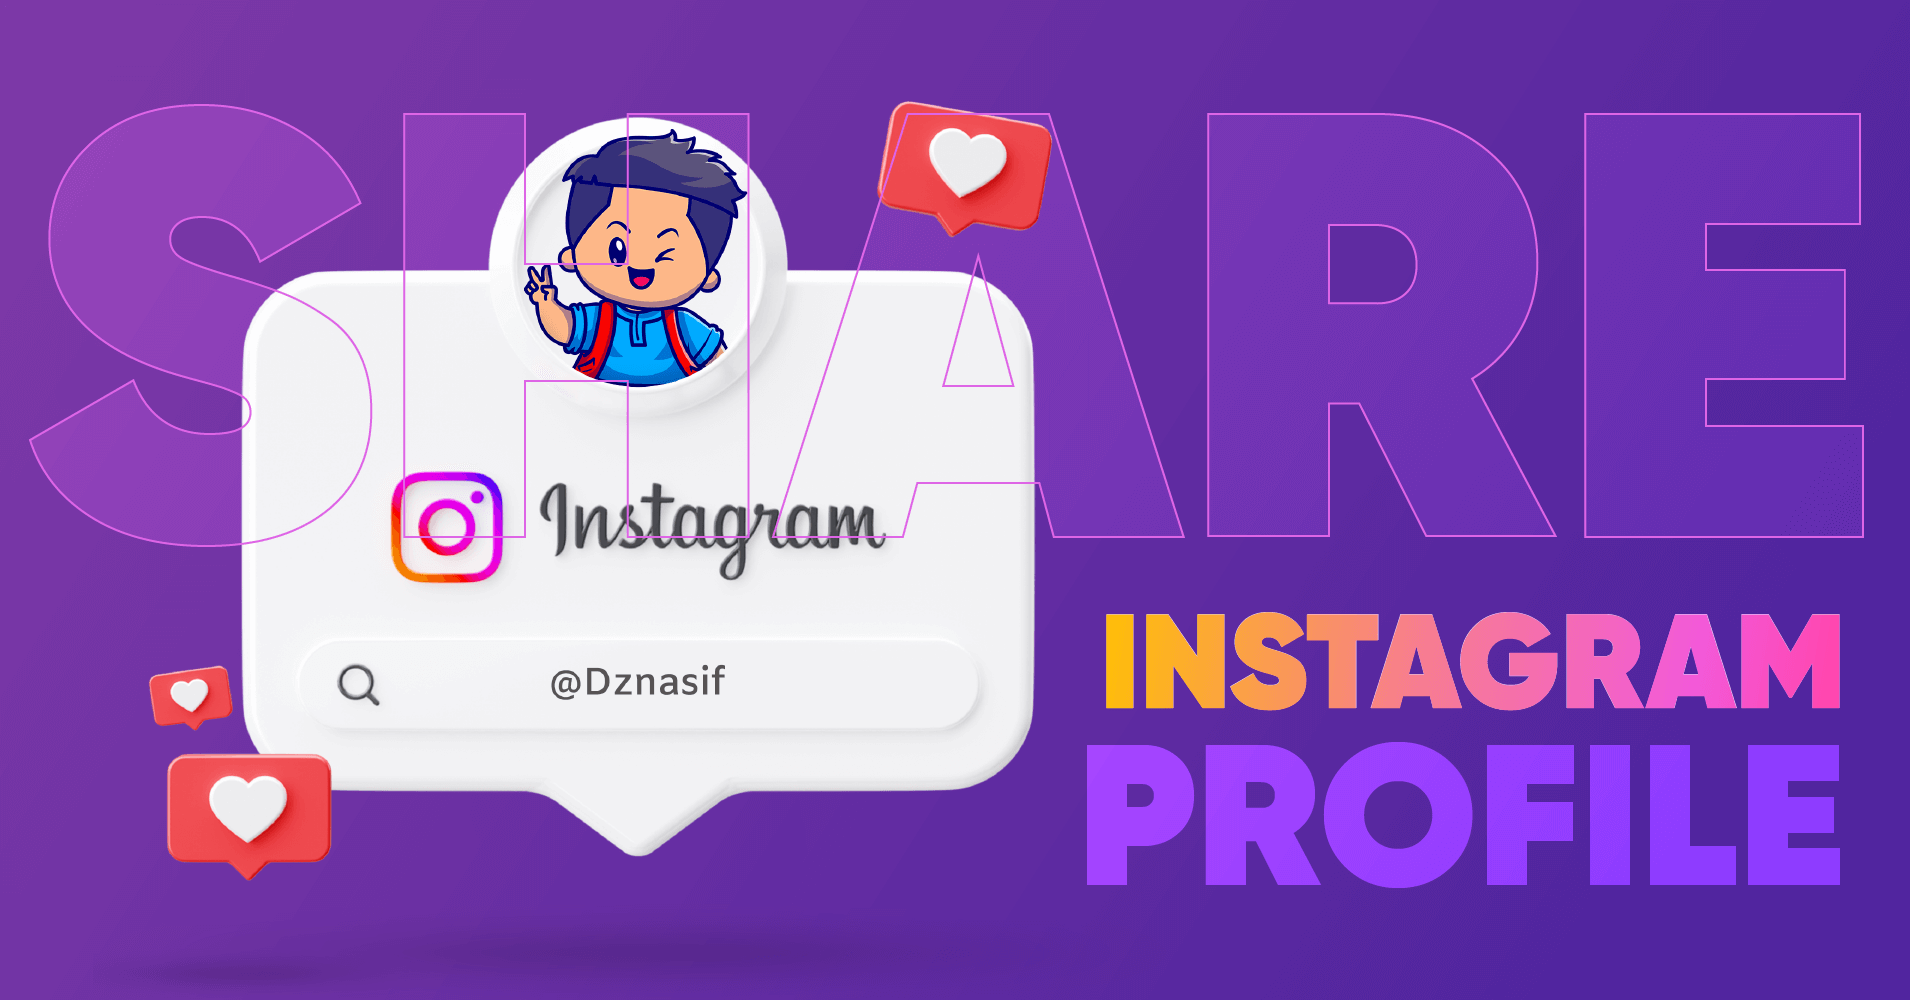 How to share your Instagram profile and posts